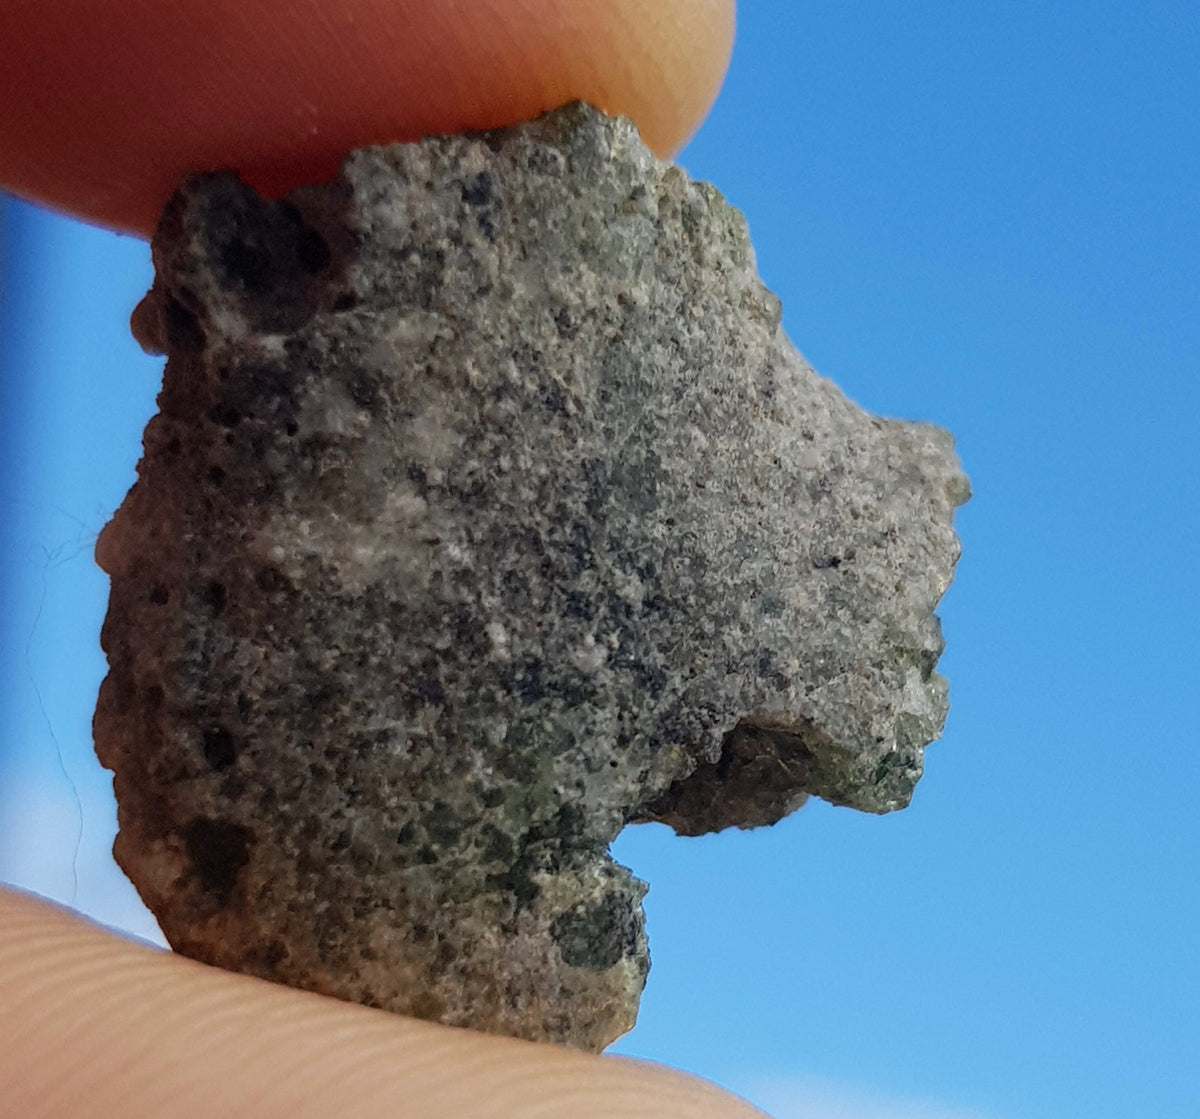 a sample of trinitite held to the sky. the piece is greenish brown, with some translucency. It does not appear to be homogenous. the surface is smoothes, the edges seem crumbly.